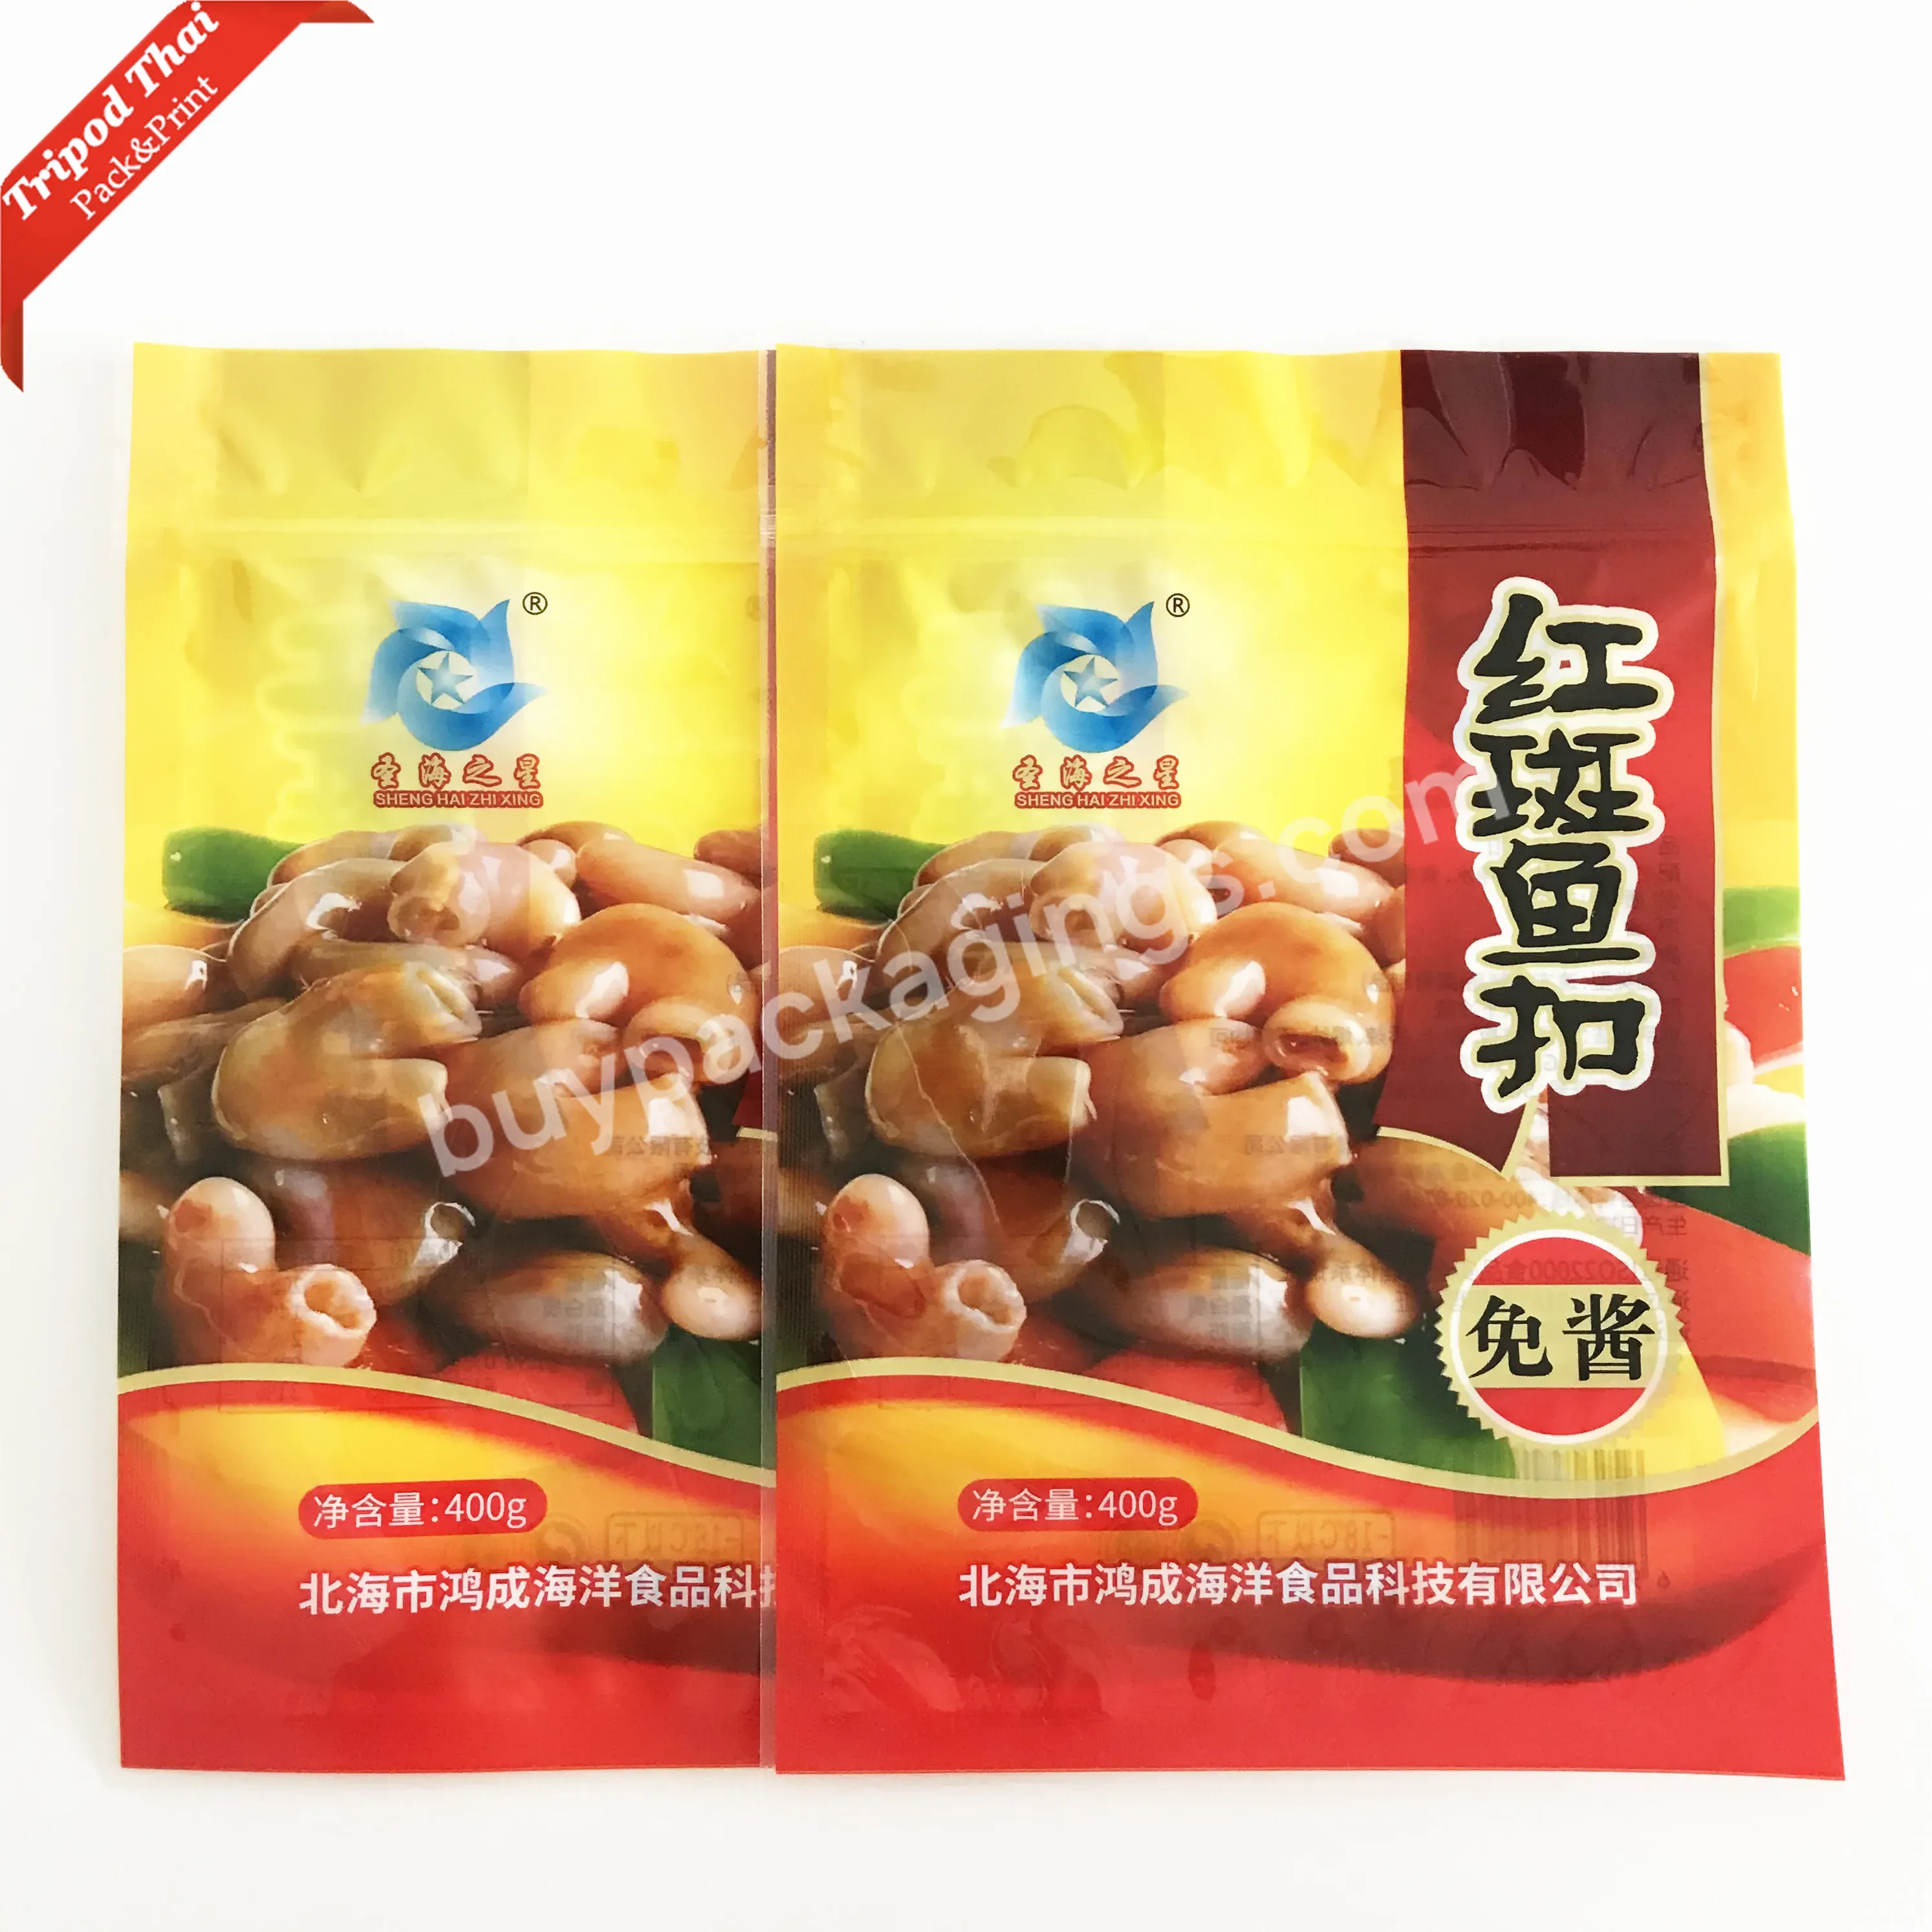 Factory Direct Sale Printed Resealable Zipper Satchets Packaging Bags For Fish Seafood Frozen Food Packing - Buy Frozen Food Bags,Plastic Food Packaging Bag,Packaging Bag For Seafood.